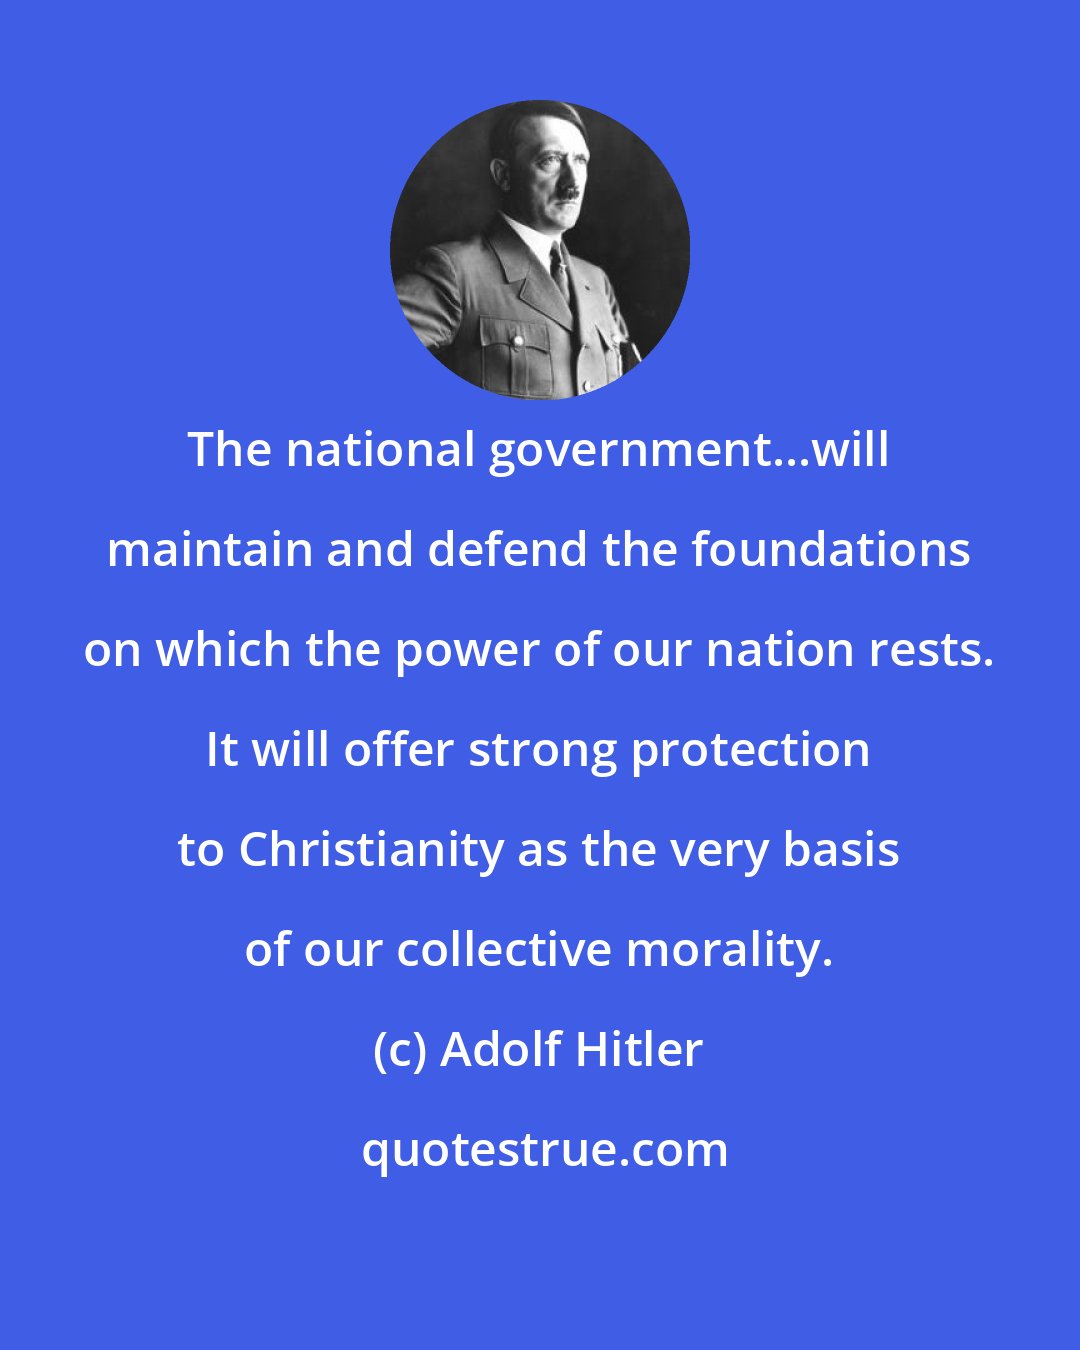 Adolf Hitler: The national government...will maintain and defend the foundations on which the power of our nation rests. It will offer strong protection to Christianity as the very basis of our collective morality.